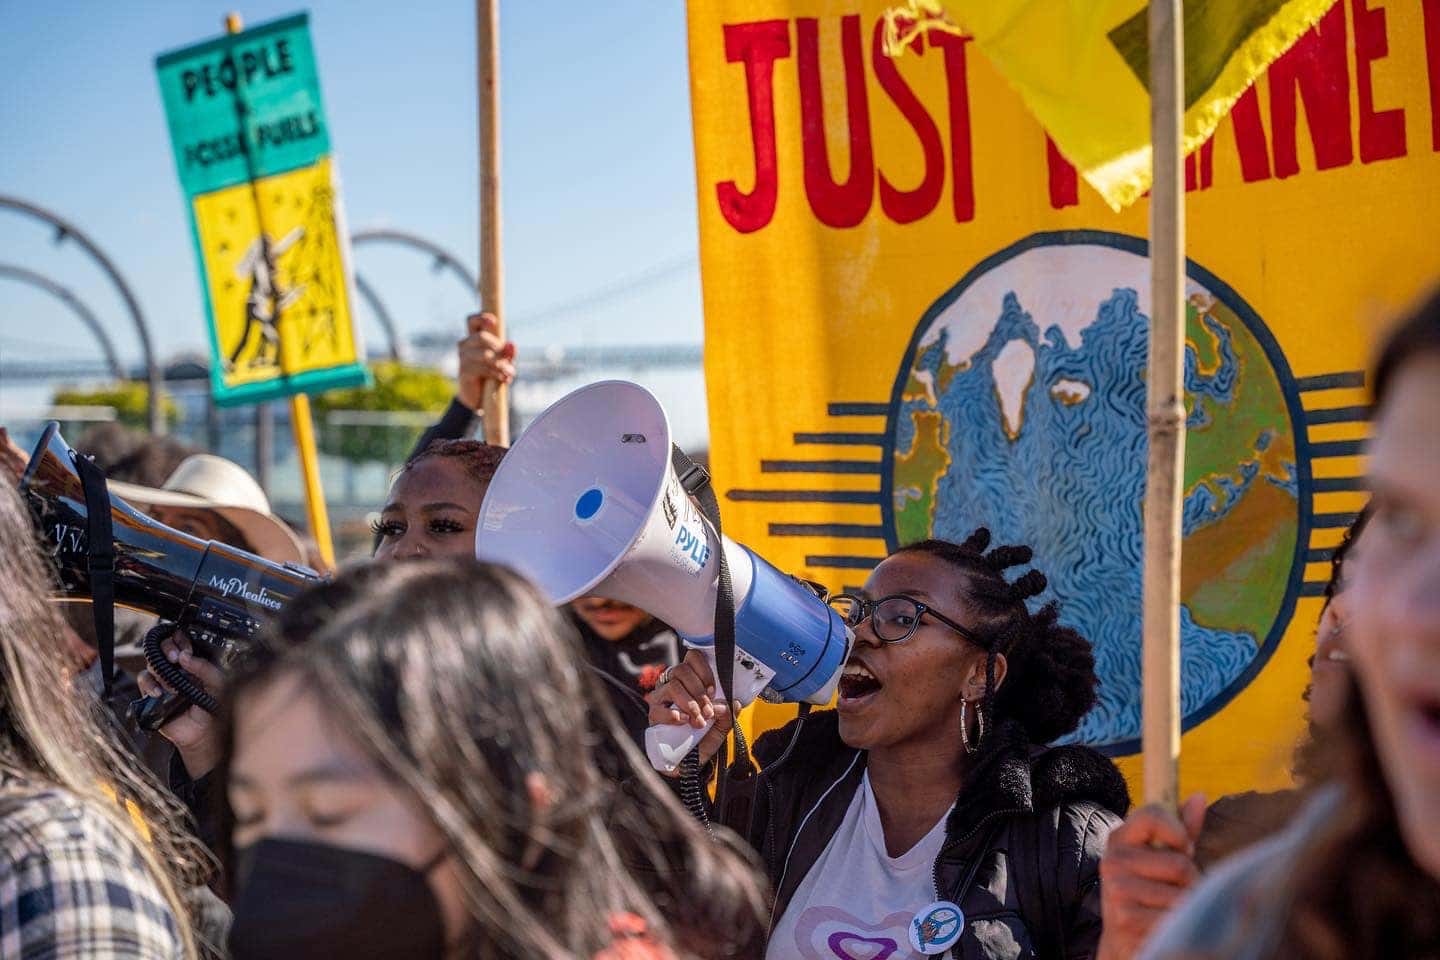 A group of young people are gathered in a public space in protest of climate injustices.